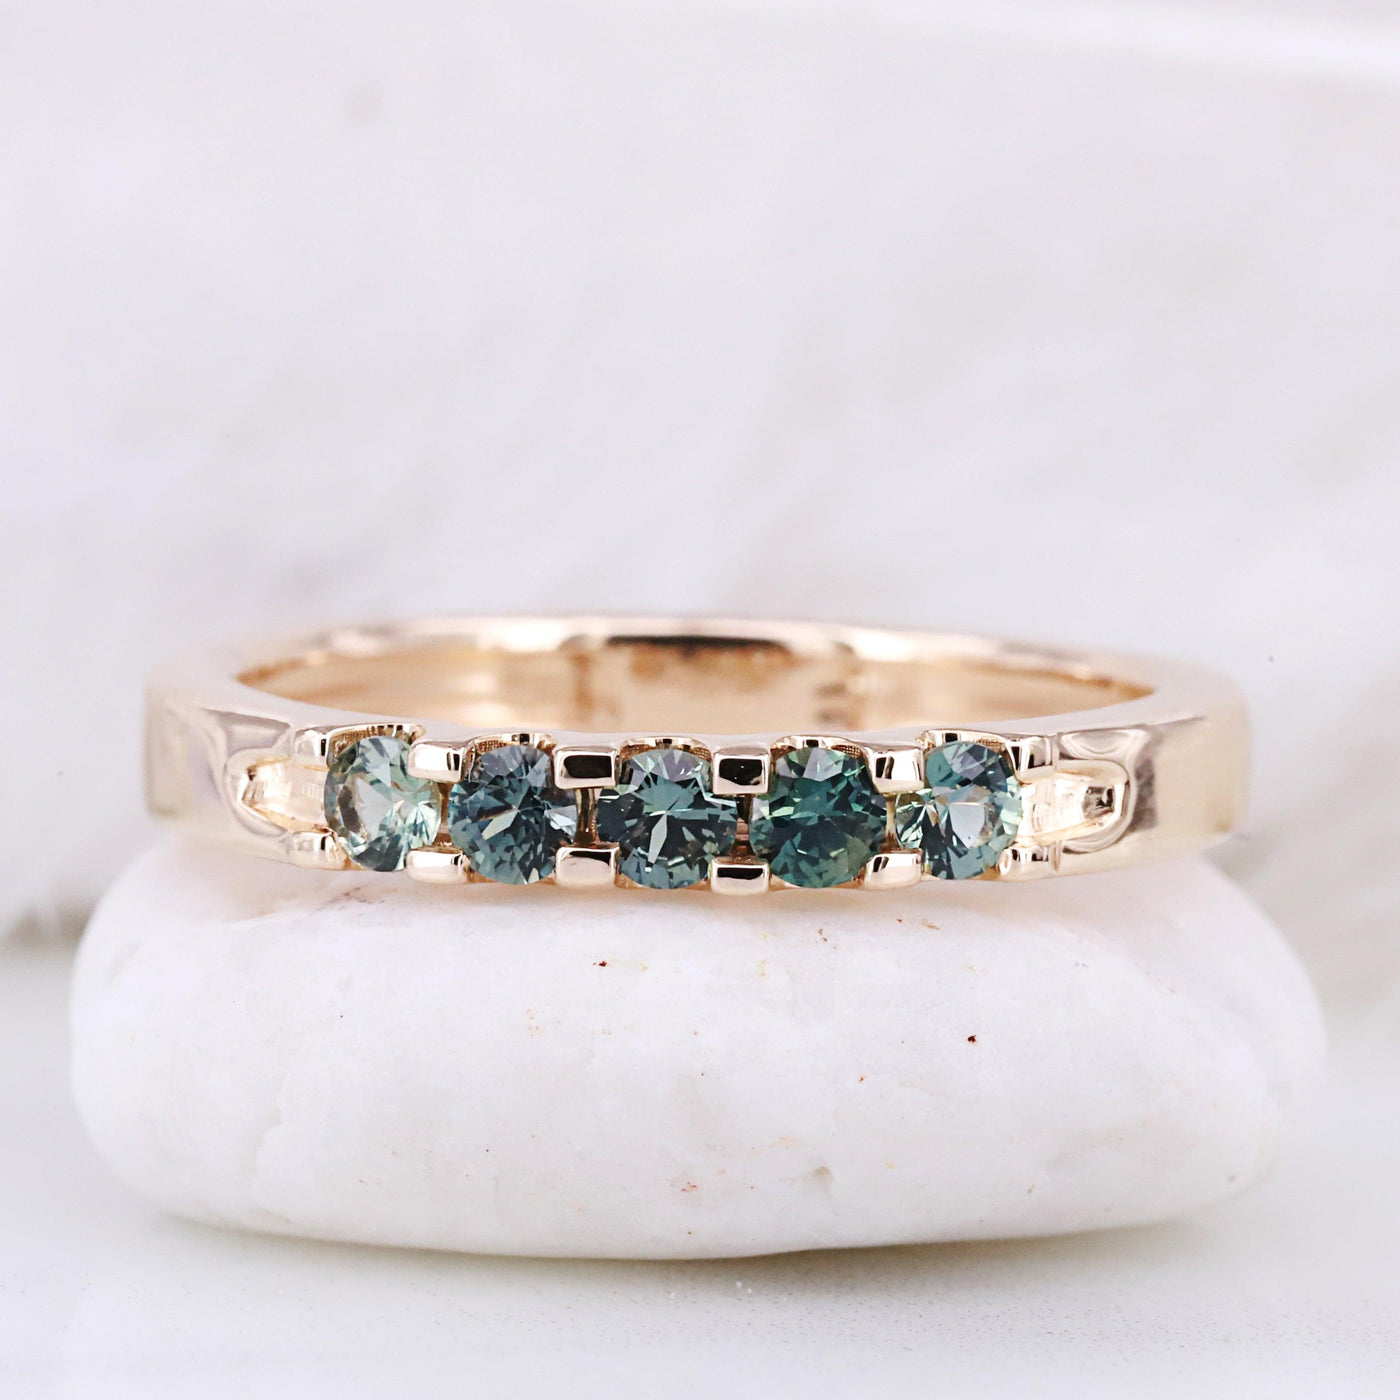 Teal sapphire ring Sapphire wedding band Engagement ring Shared prongs ring